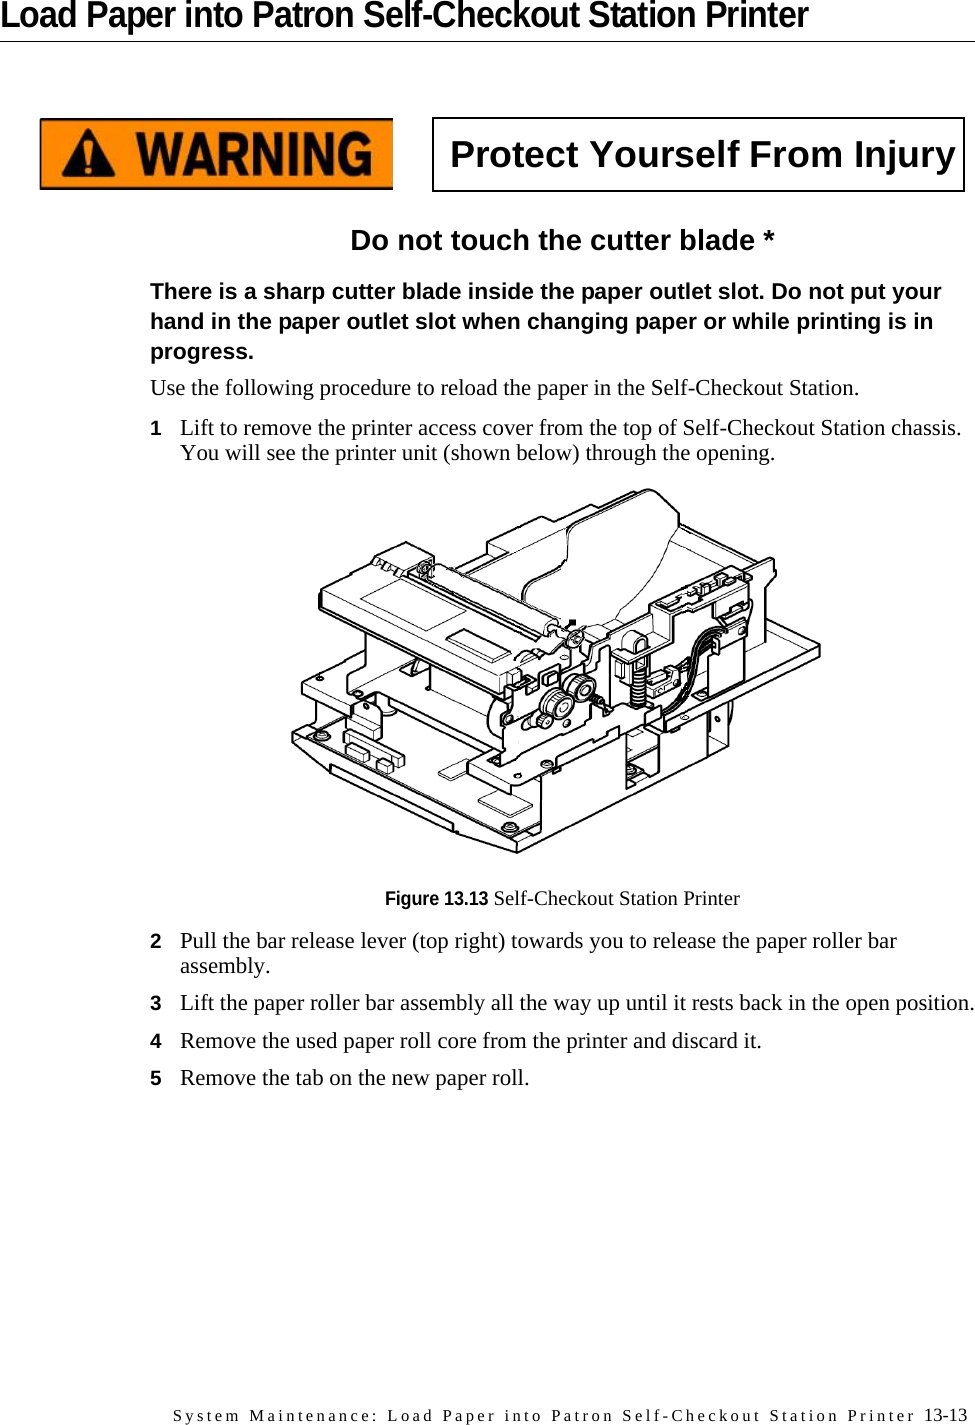 System Maintenance: Load Paper into Patron Self-Checkout Station Printer 13-13Load Paper into Patron Self-Checkout Station PrinterDo not touch the cutter blade *There is a sharp cutter blade inside the paper outlet slot. Do not put your hand in the paper outlet slot when changing paper or while printing is in progress.Use the following procedure to reload the paper in the Self-Checkout Station.1Lift to remove the printer access cover from the top of Self-Checkout Station chassis. You will see the printer unit (shown below) through the opening.Figure 13.13 Self-Checkout Station Printer2Pull the bar release lever (top right) towards you to release the paper roller bar assembly.3Lift the paper roller bar assembly all the way up until it rests back in the open position.4Remove the used paper roll core from the printer and discard it.5Remove the tab on the new paper roll.Protect Yourself From Injury